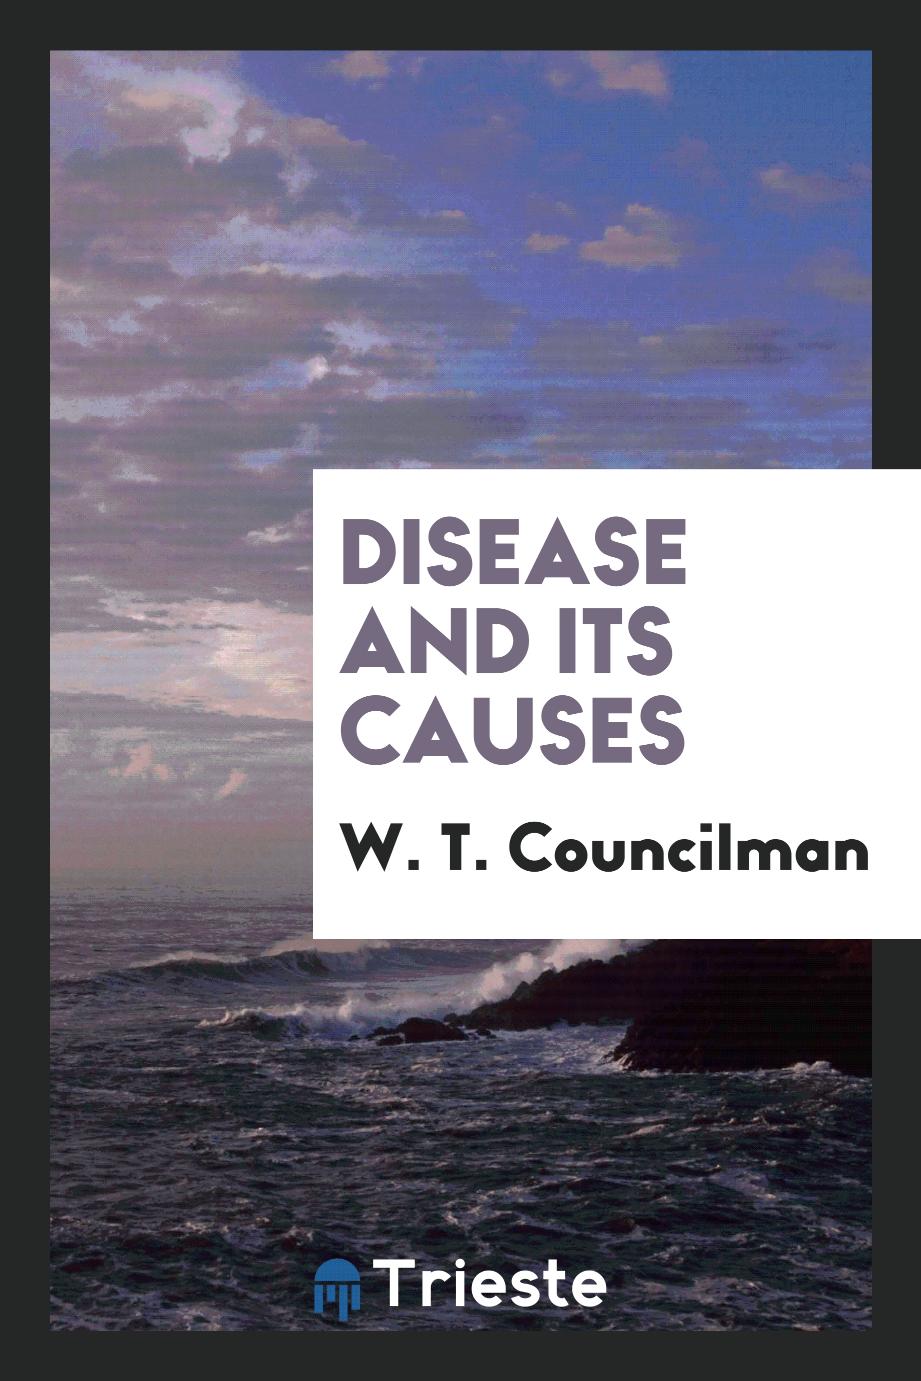 Disease and its causes